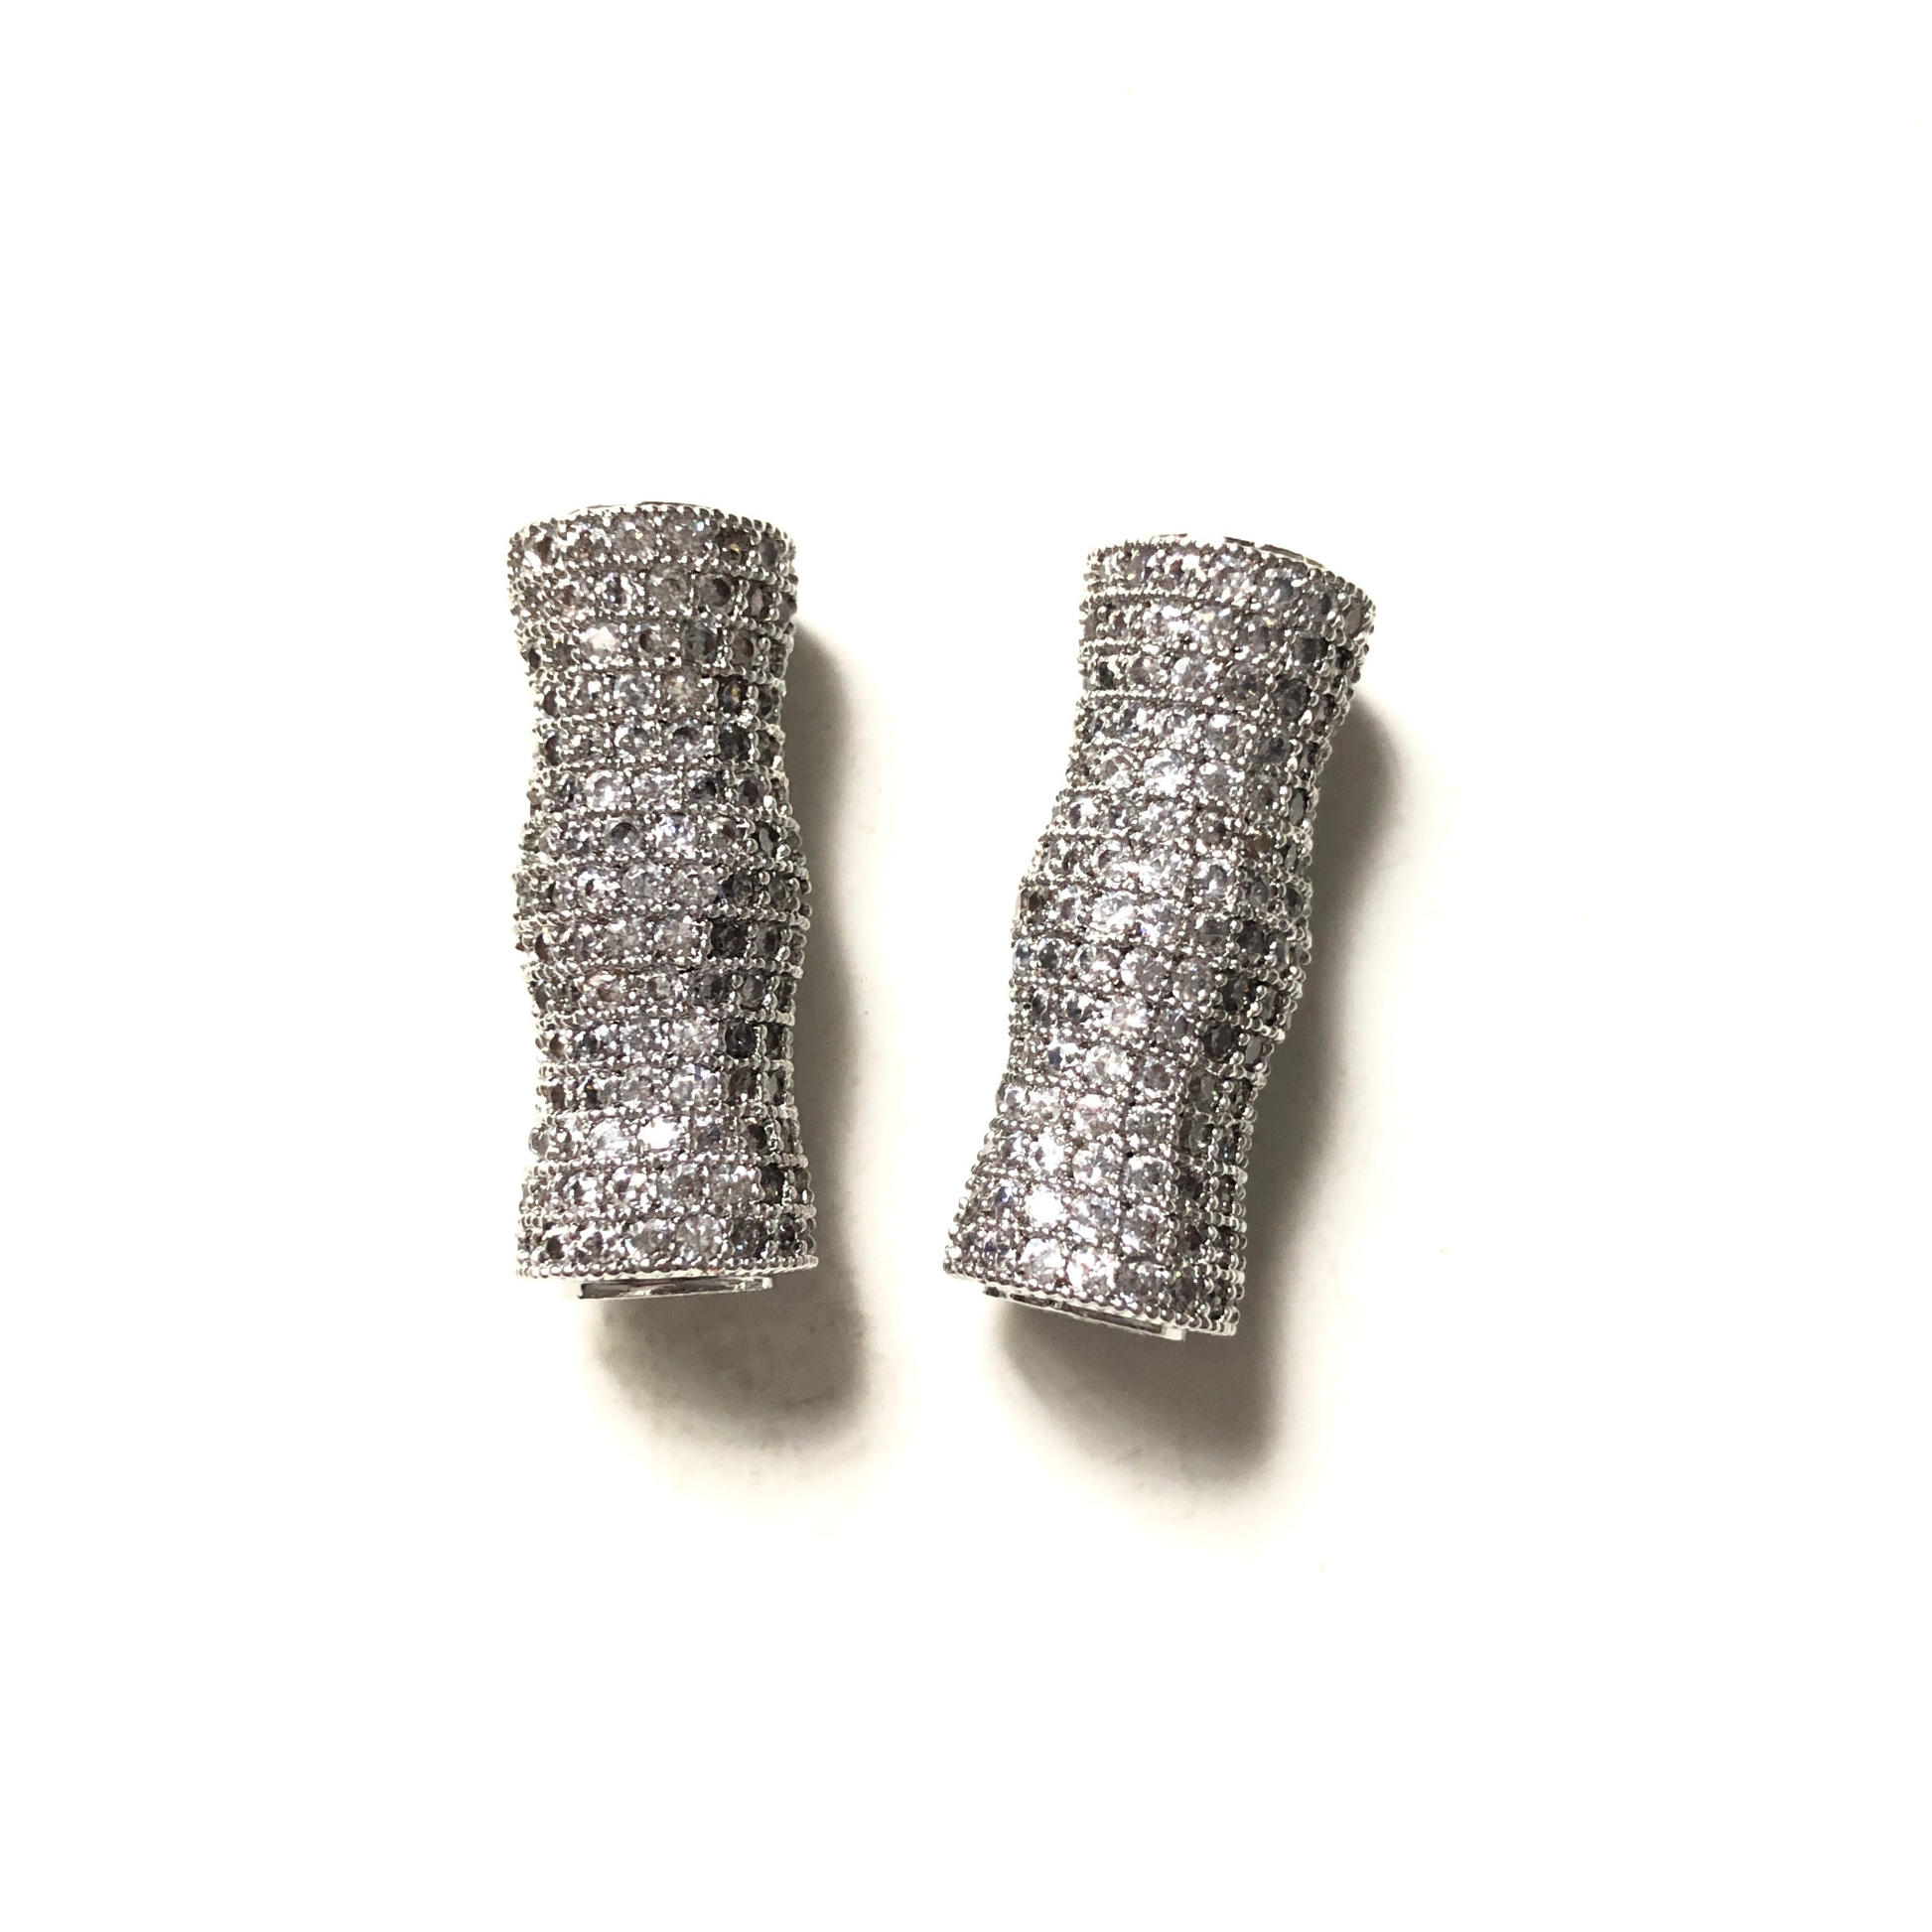 5-10pcs/lot 27.5*10mm CZ Paved Wave Tube Bar Spacers Silver CZ Paved Spacers Tube Bar Centerpieces Charms Beads Beyond